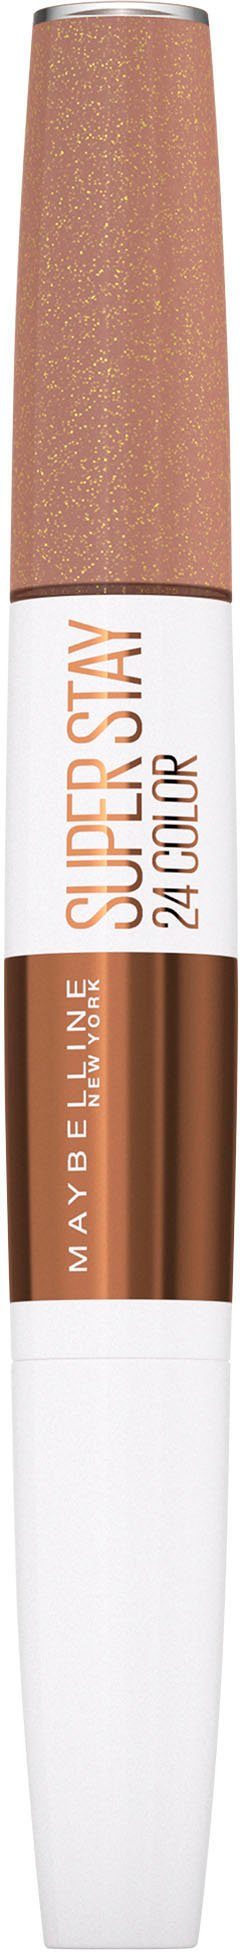 24H Once NEW 885 Stay Nr. Chai Super YORK MAYBELLINE Coffee More Lippenstift